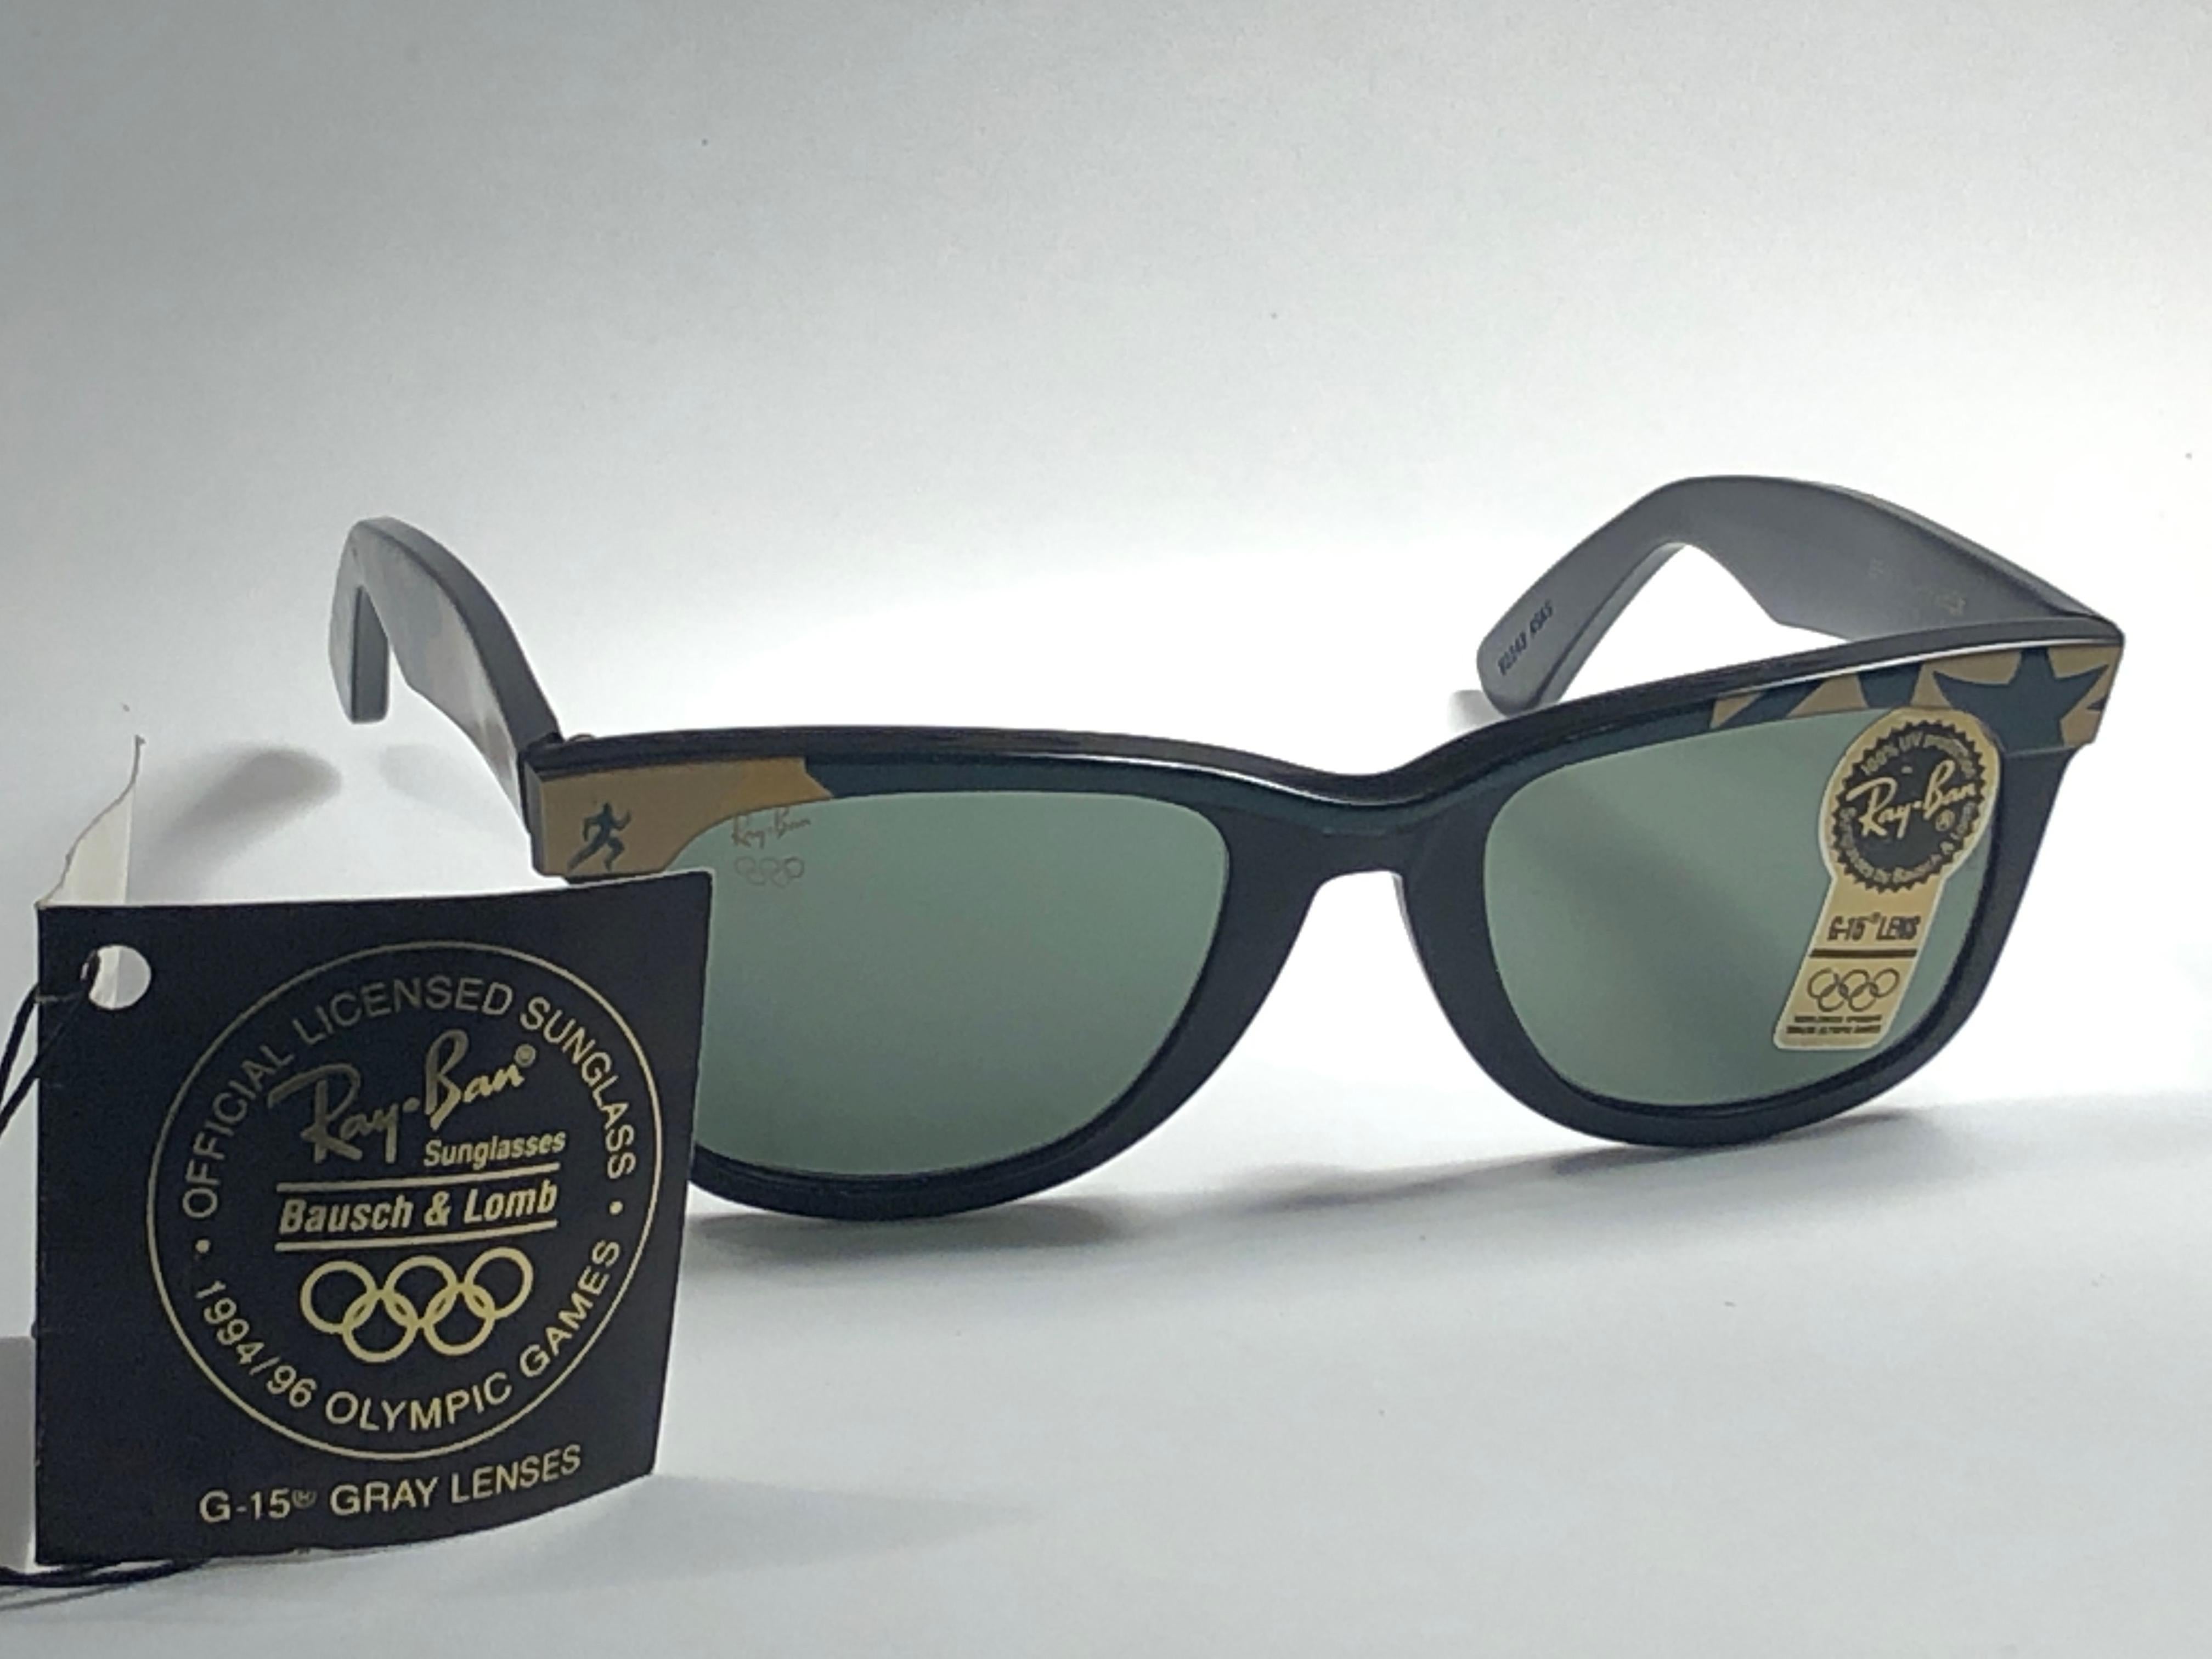 New classic Wayfarer Atlanta 1996 Olympic Games. B&L etched in both G15 grey lenses. 
Please notice that this item is nearly 40 years old and could show some storage wear.  
New, ever worn or displayed.

Made in USA.